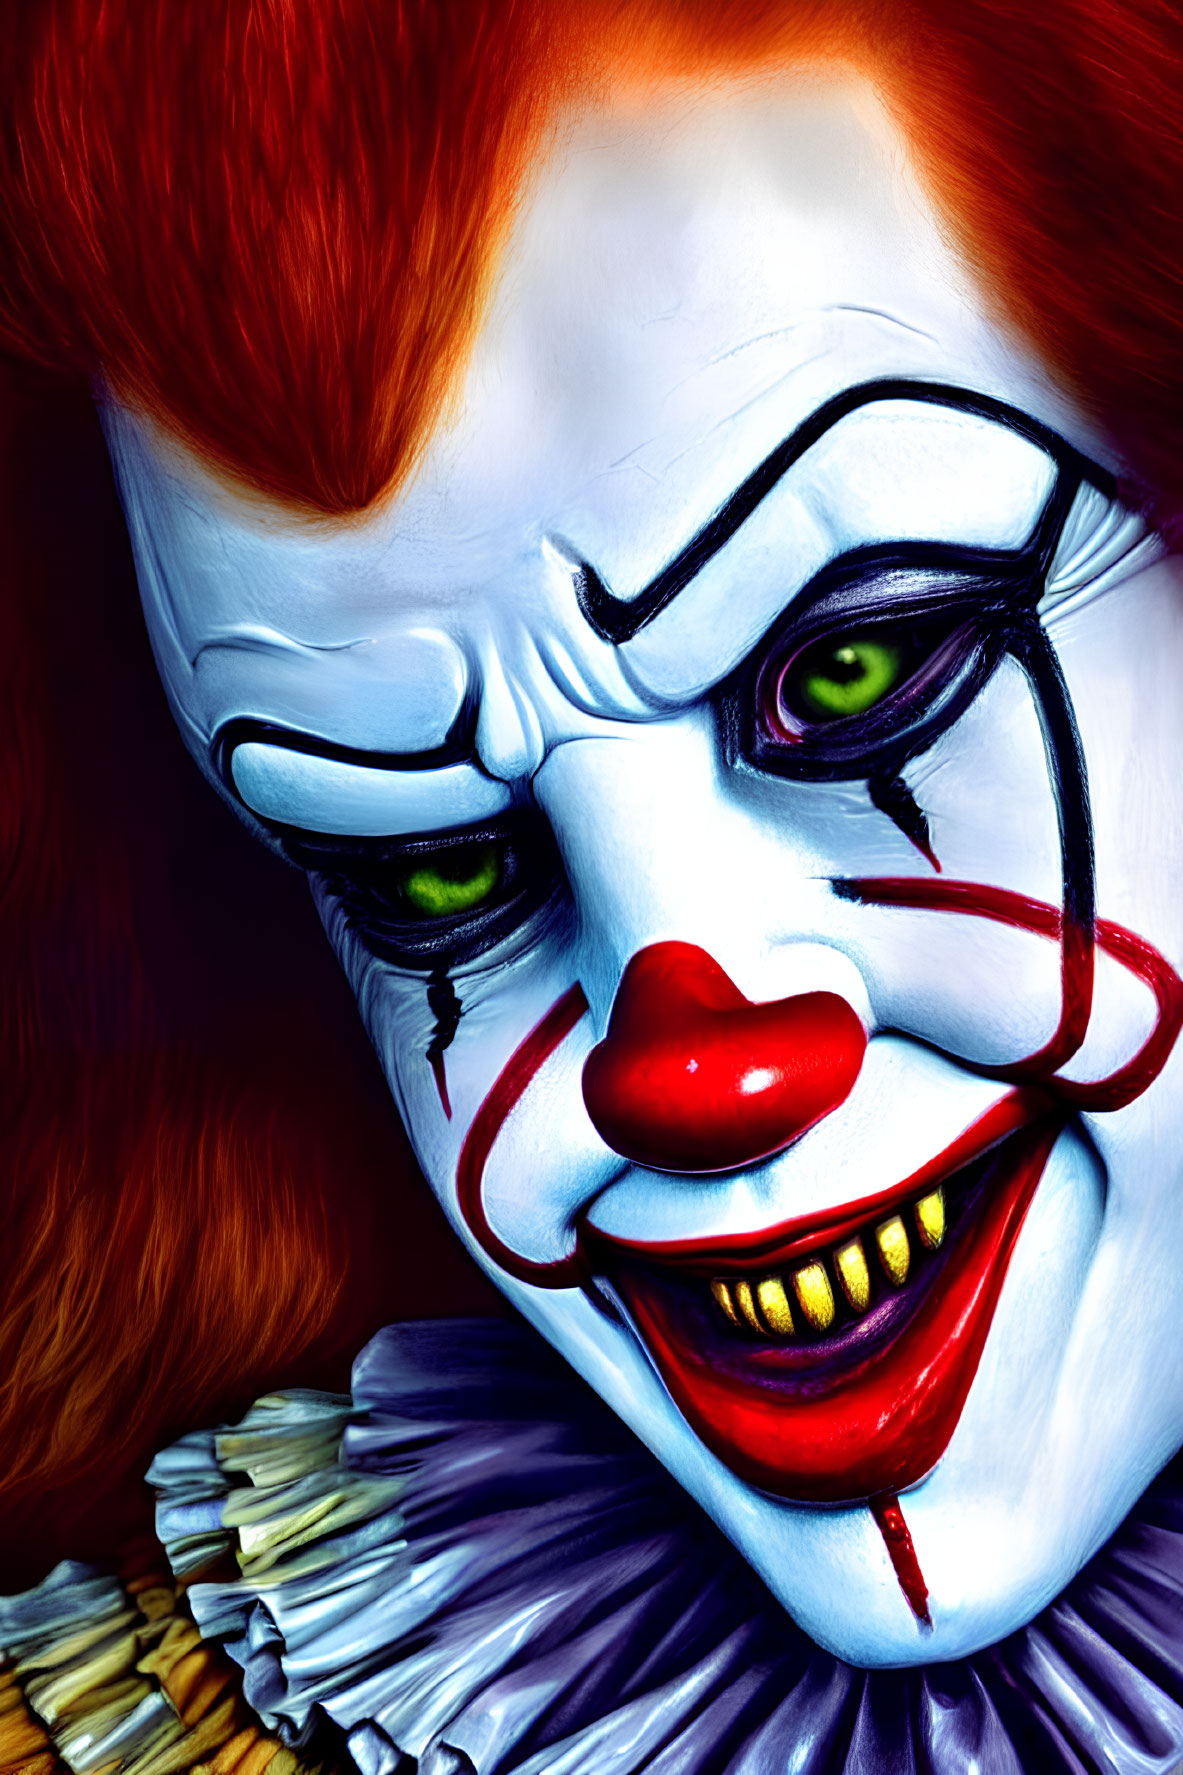 Detailed close-up of a menacing clown with red hair, green eyes, sharp teeth, and white face